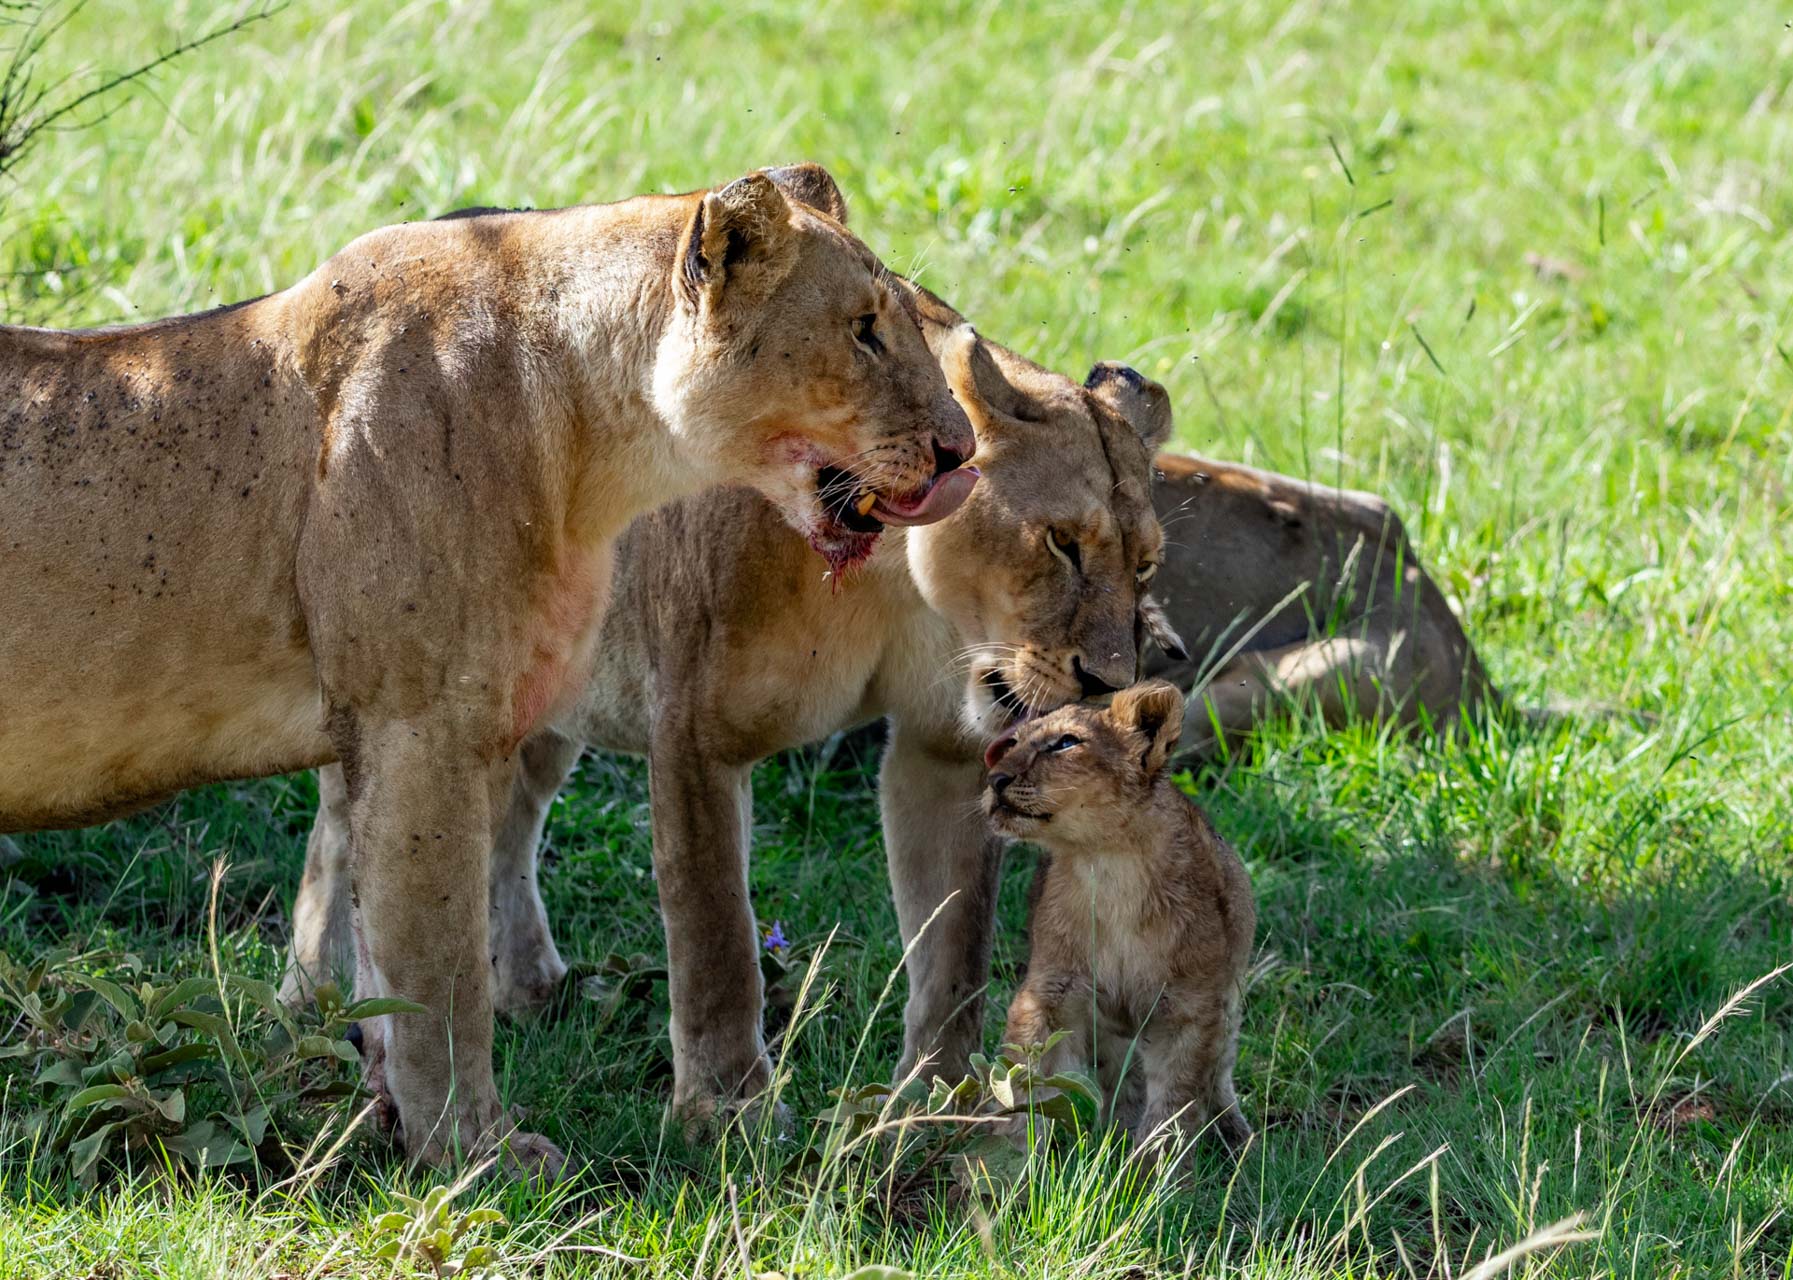 A pride of Iions with young cubs cleans up after a meal